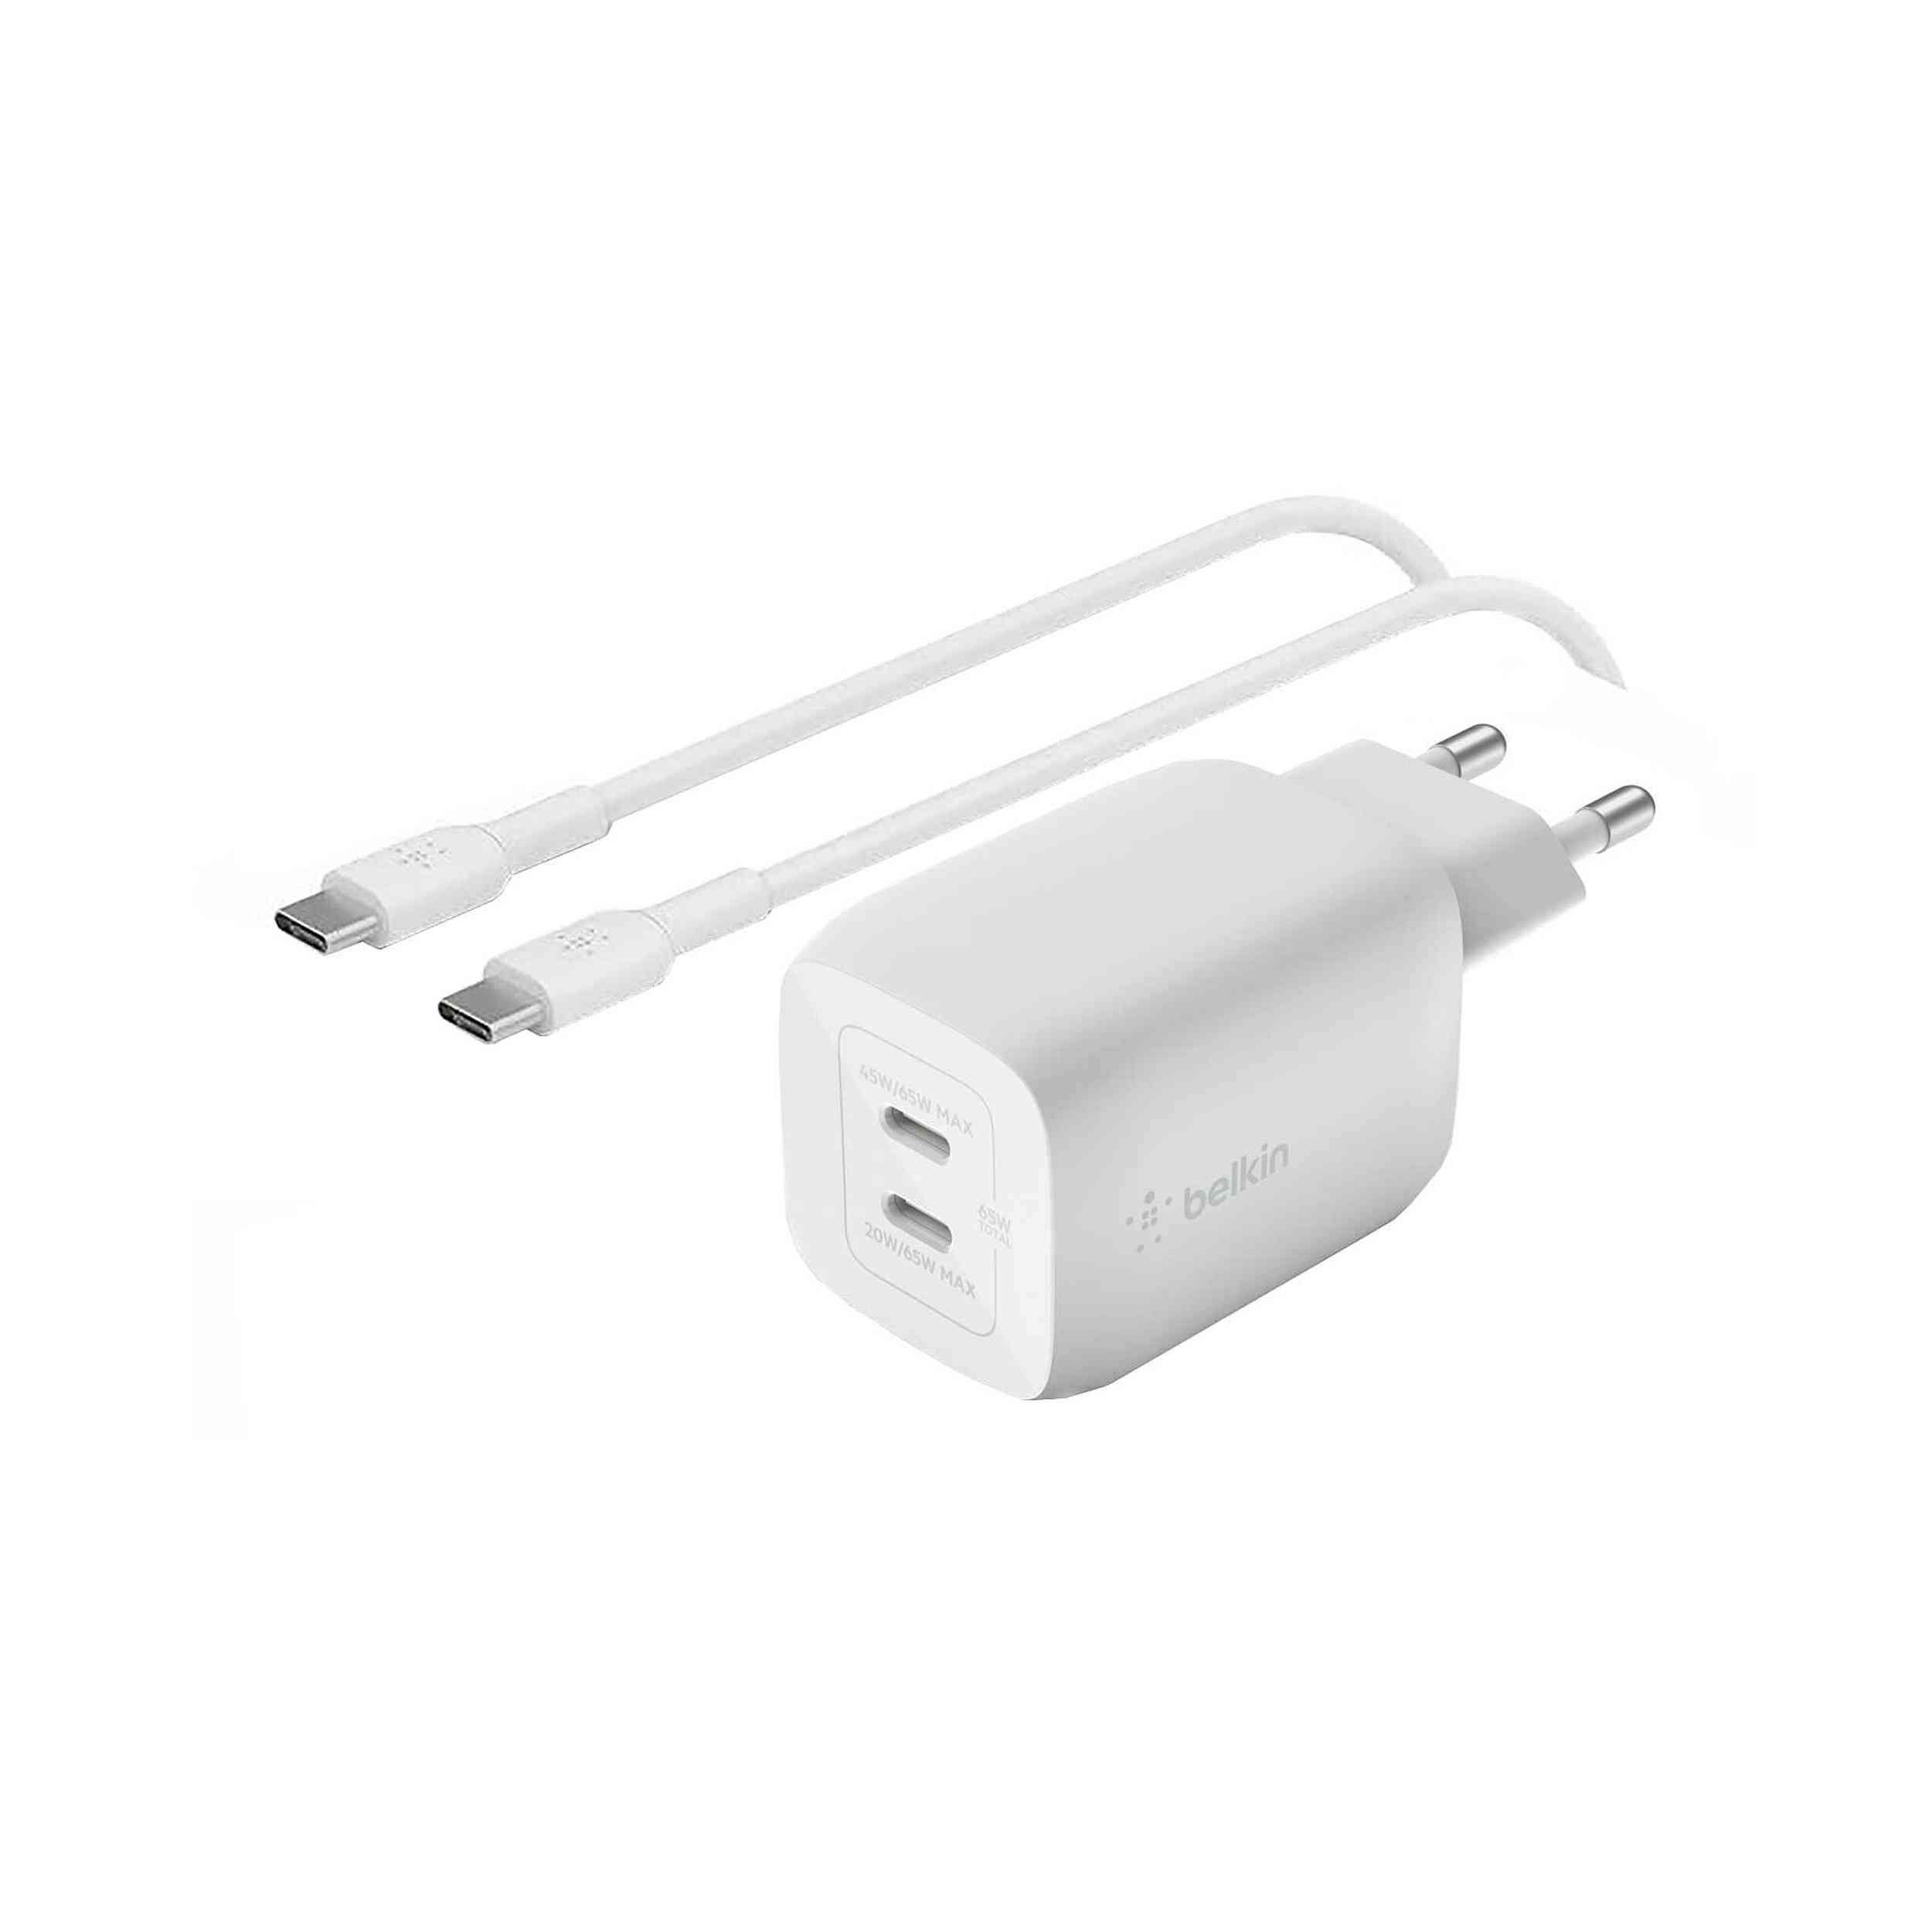 Belkin Wall Charger